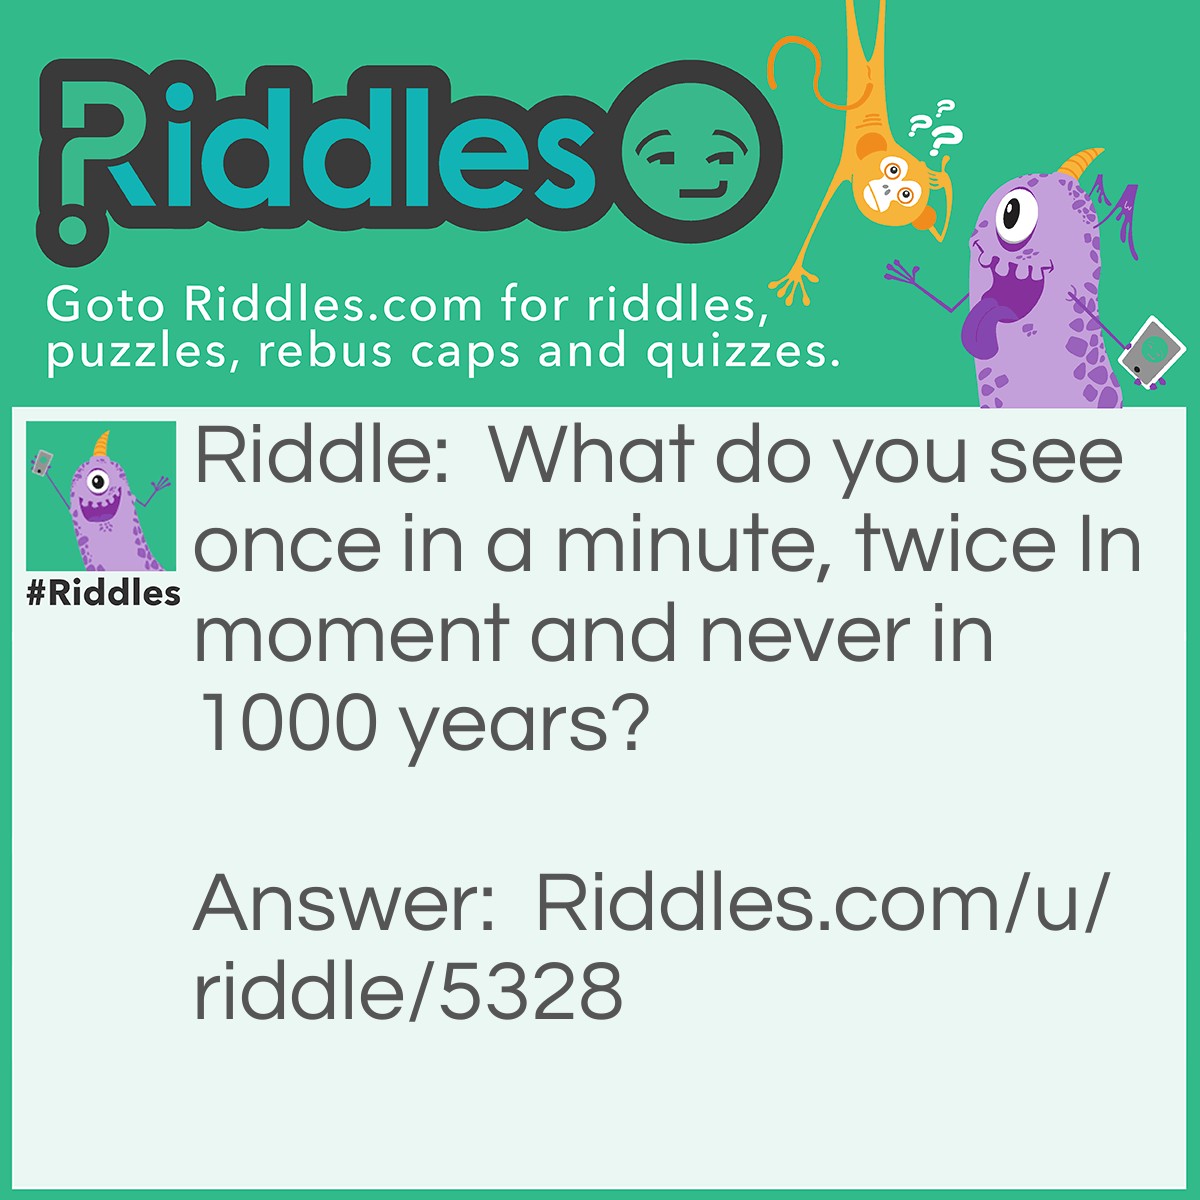 Riddle: What do you see once in a minute, twice In moment and never in 1000 years? Answer: Letter m.